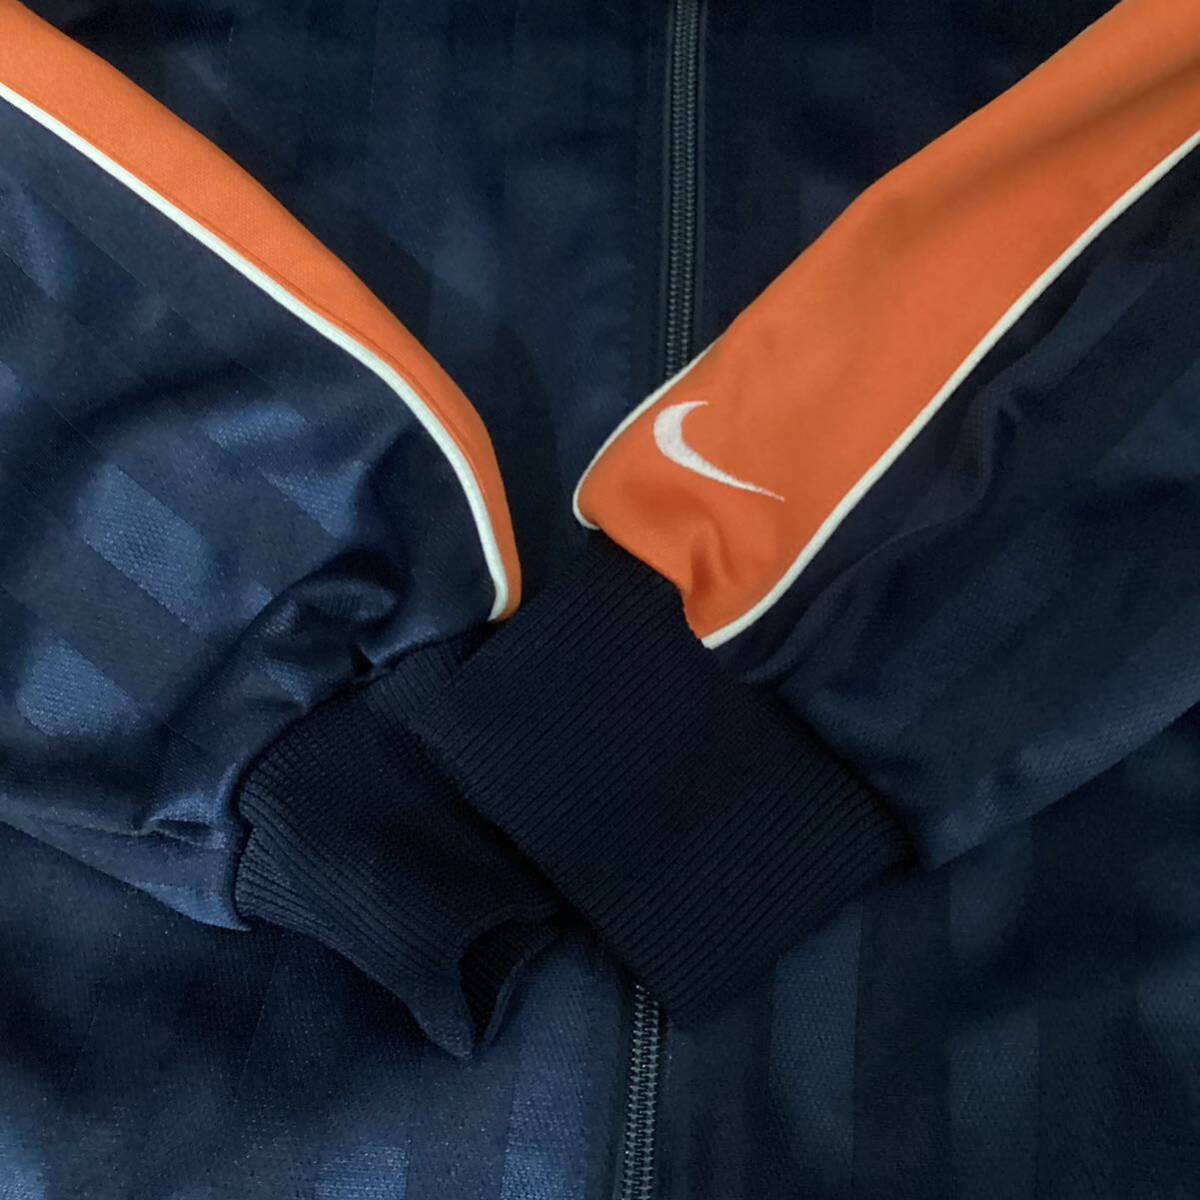 [ old clothes ]NIKE Nike jersey jersey navy orange L men's tops 